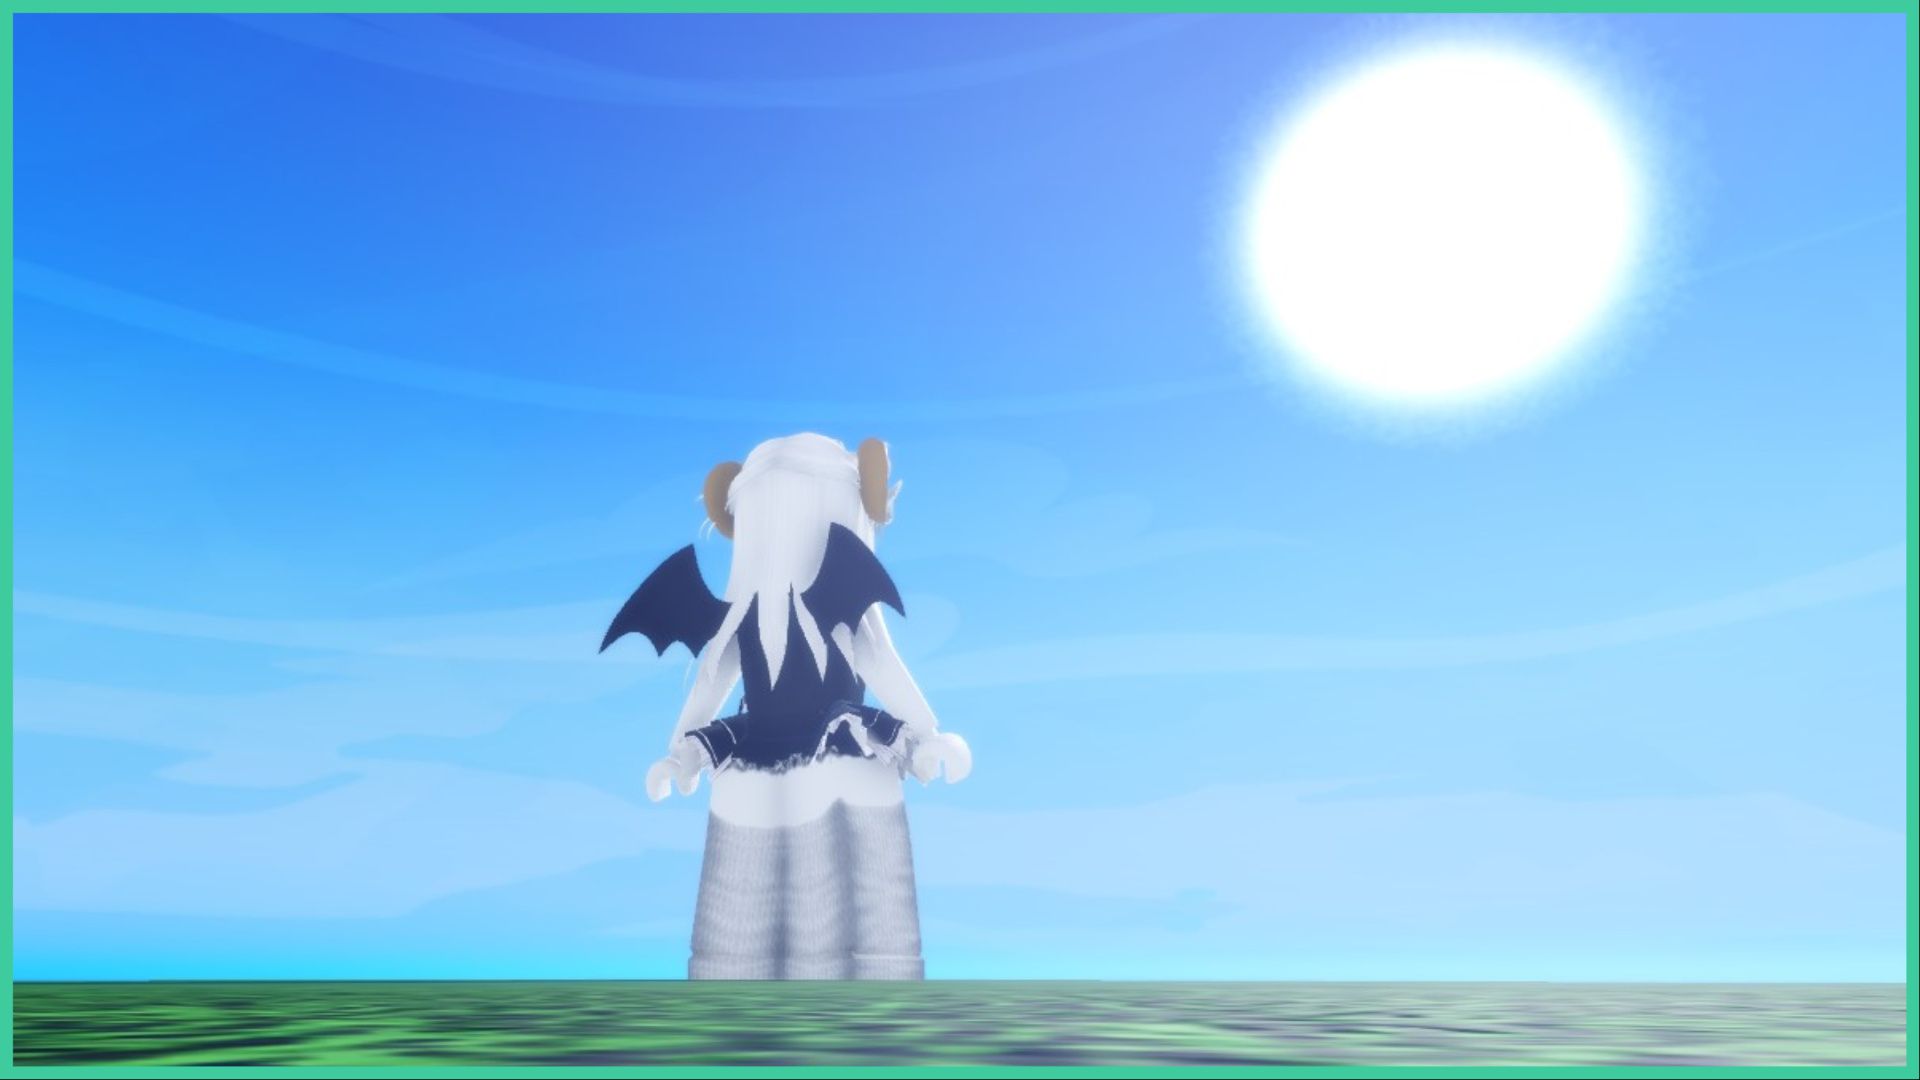 feature image for our demon piece weapons tier list, the player is looking out at the rising sun as it glows high in the sky as they stand on some grass, there are some faint clouds across the blue sky